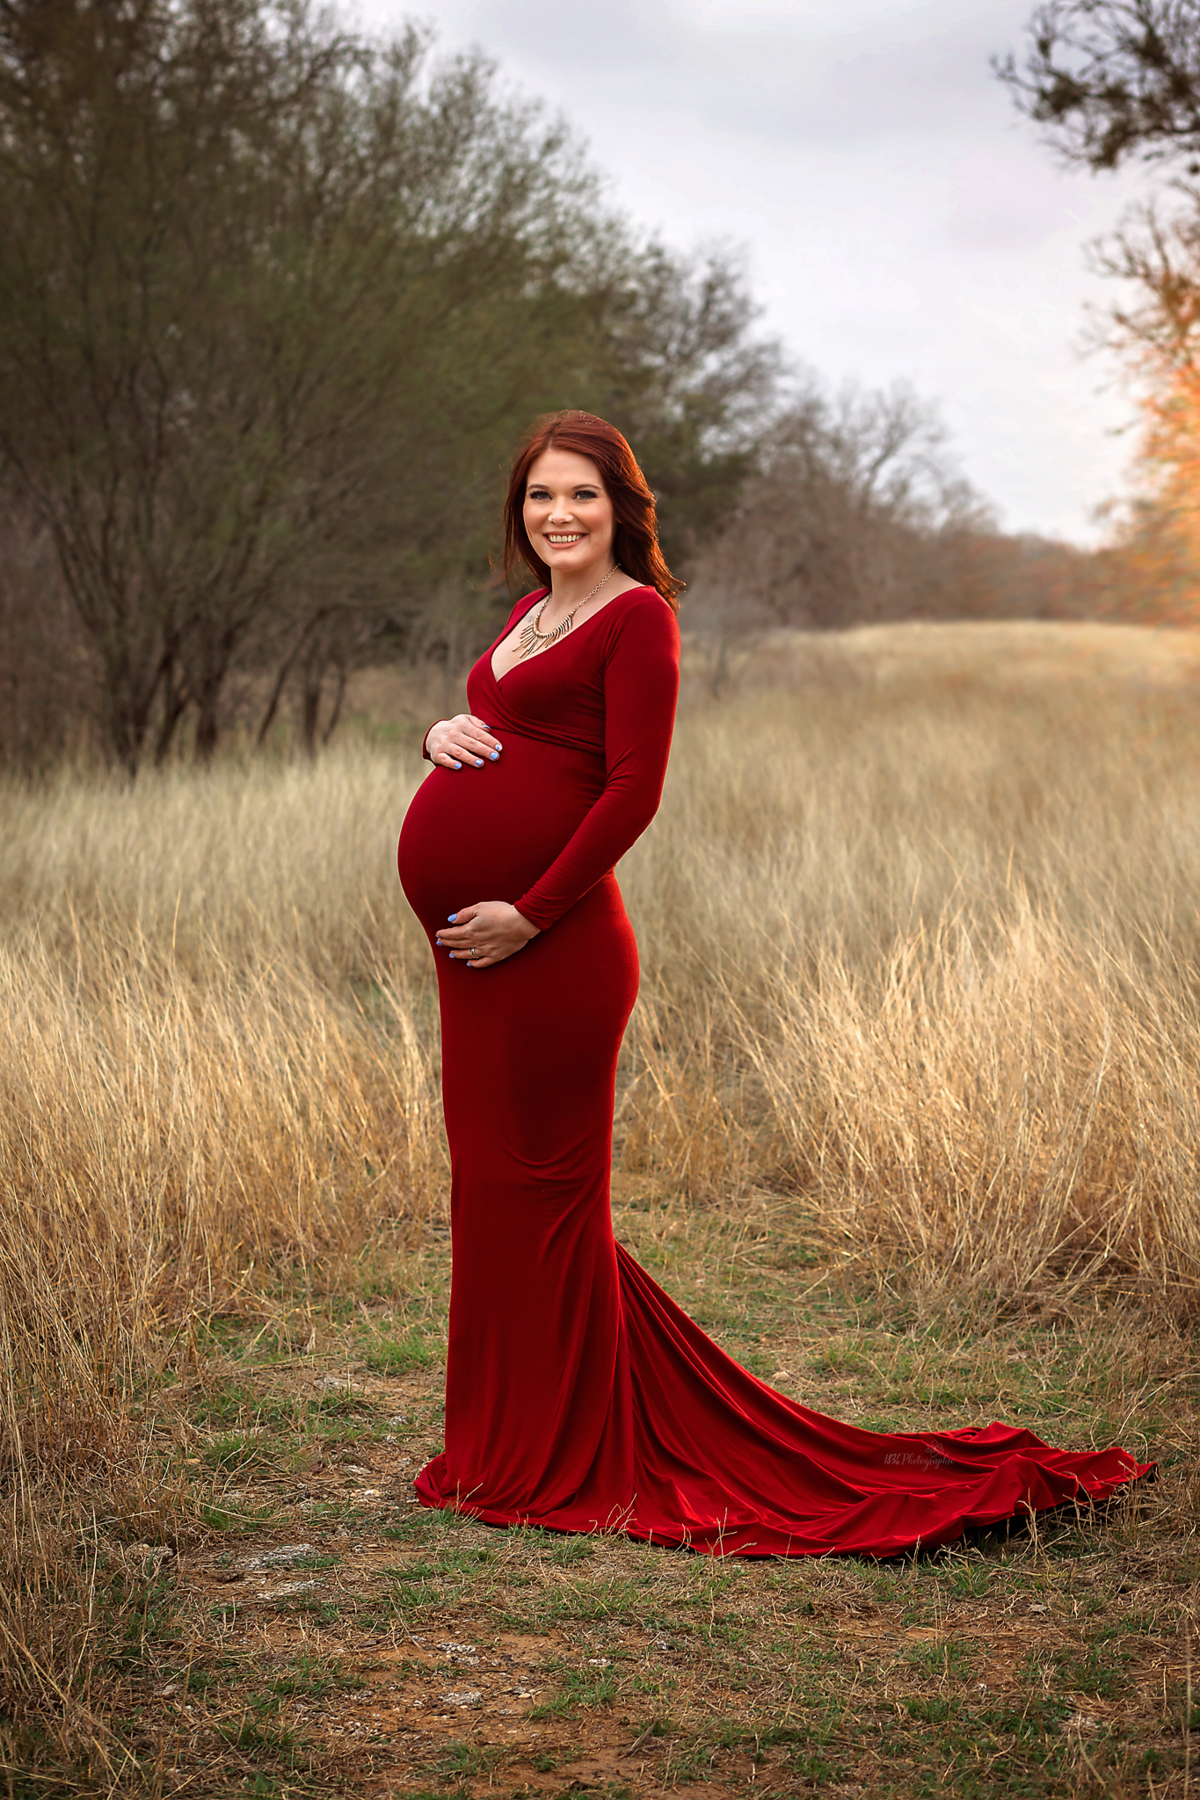 Radiate glamour in a styled winter maternity session near San Antonio. Our mom-to-be, draped in a scarlet flying dress, brings radiance and sophistication to the winter field setting.